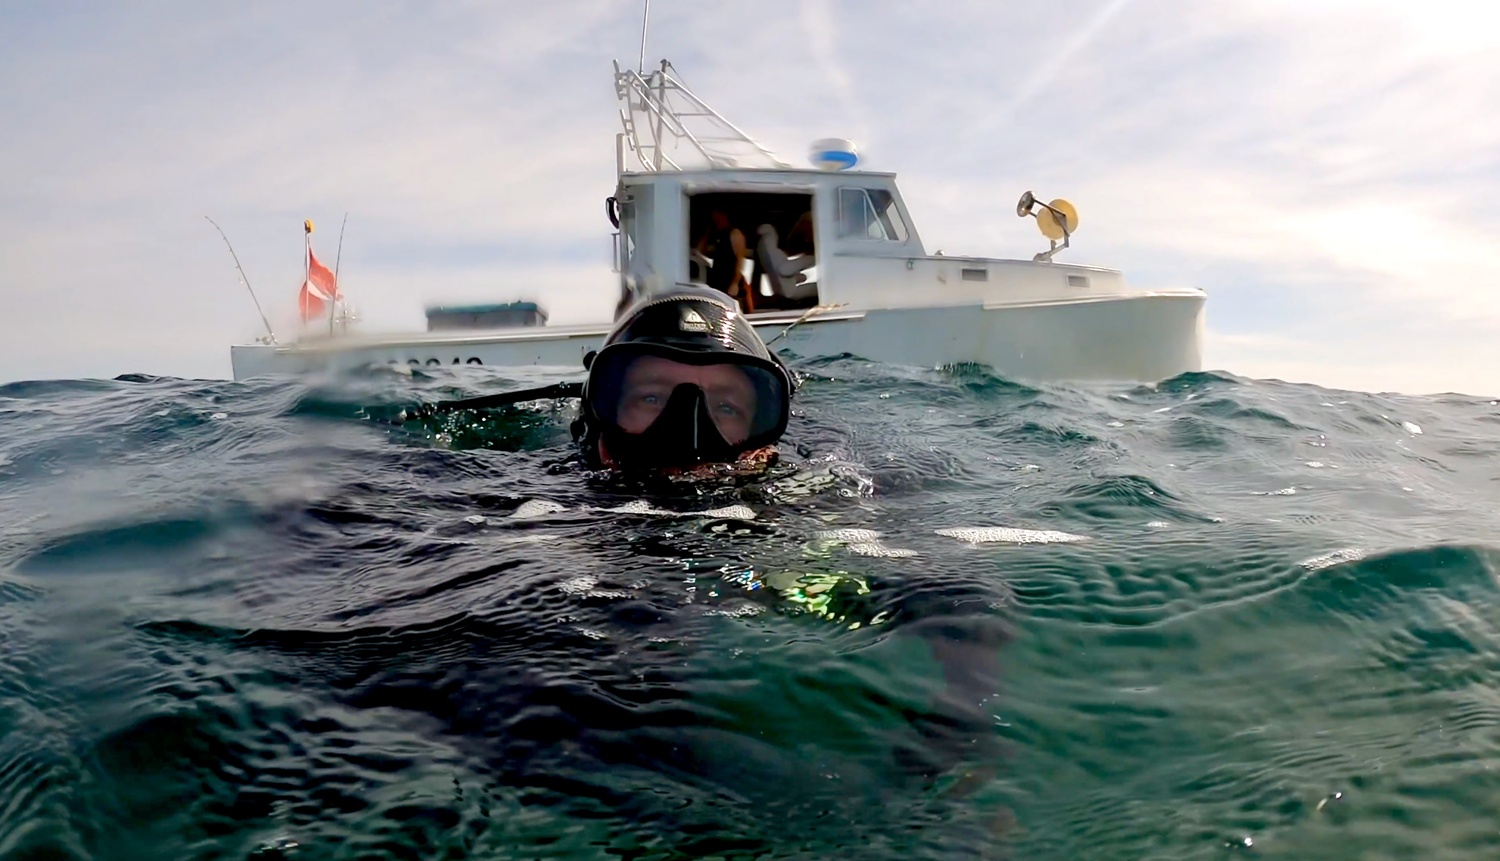 Diving lobsterman Michael Packard and his boat in a scene from David Abel's new documentary 